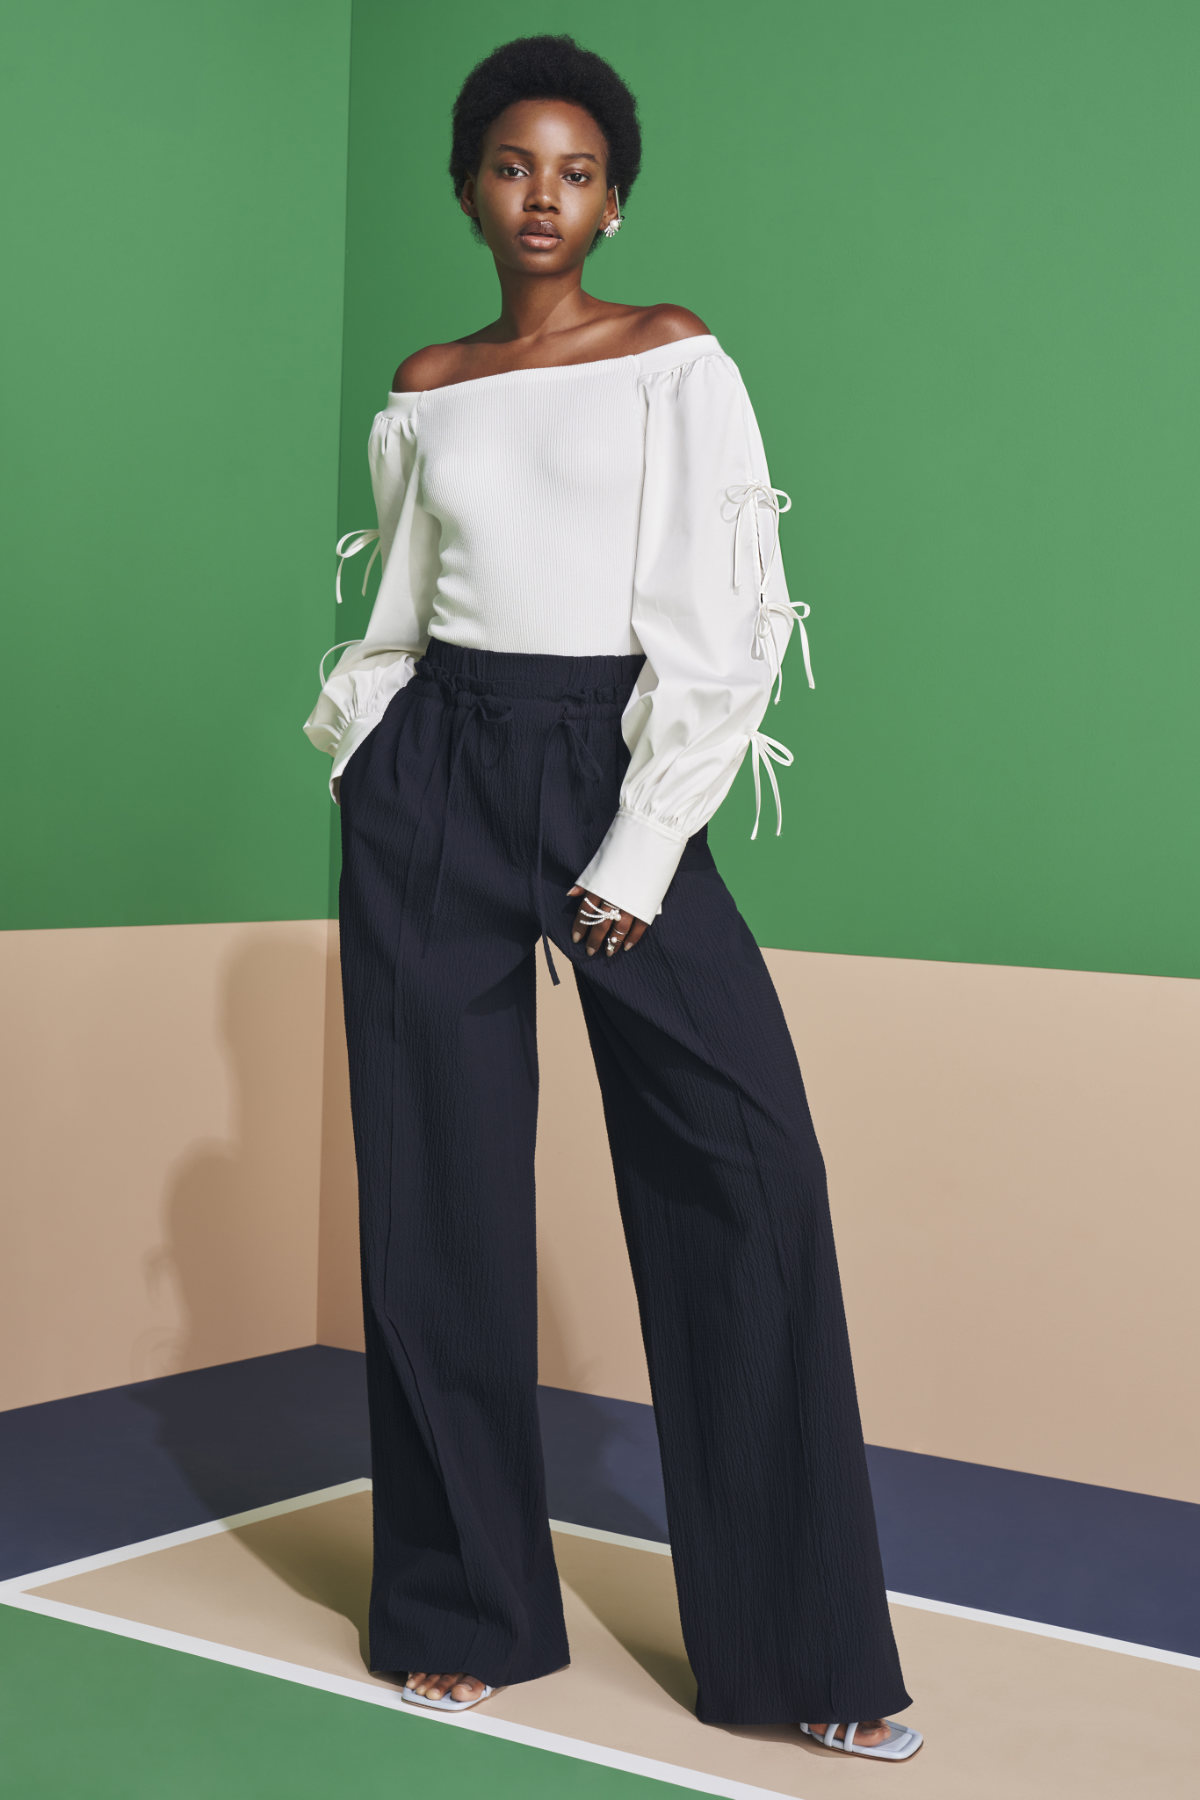 ADEAM Presents Its New Pre-Fall 2023 Collection